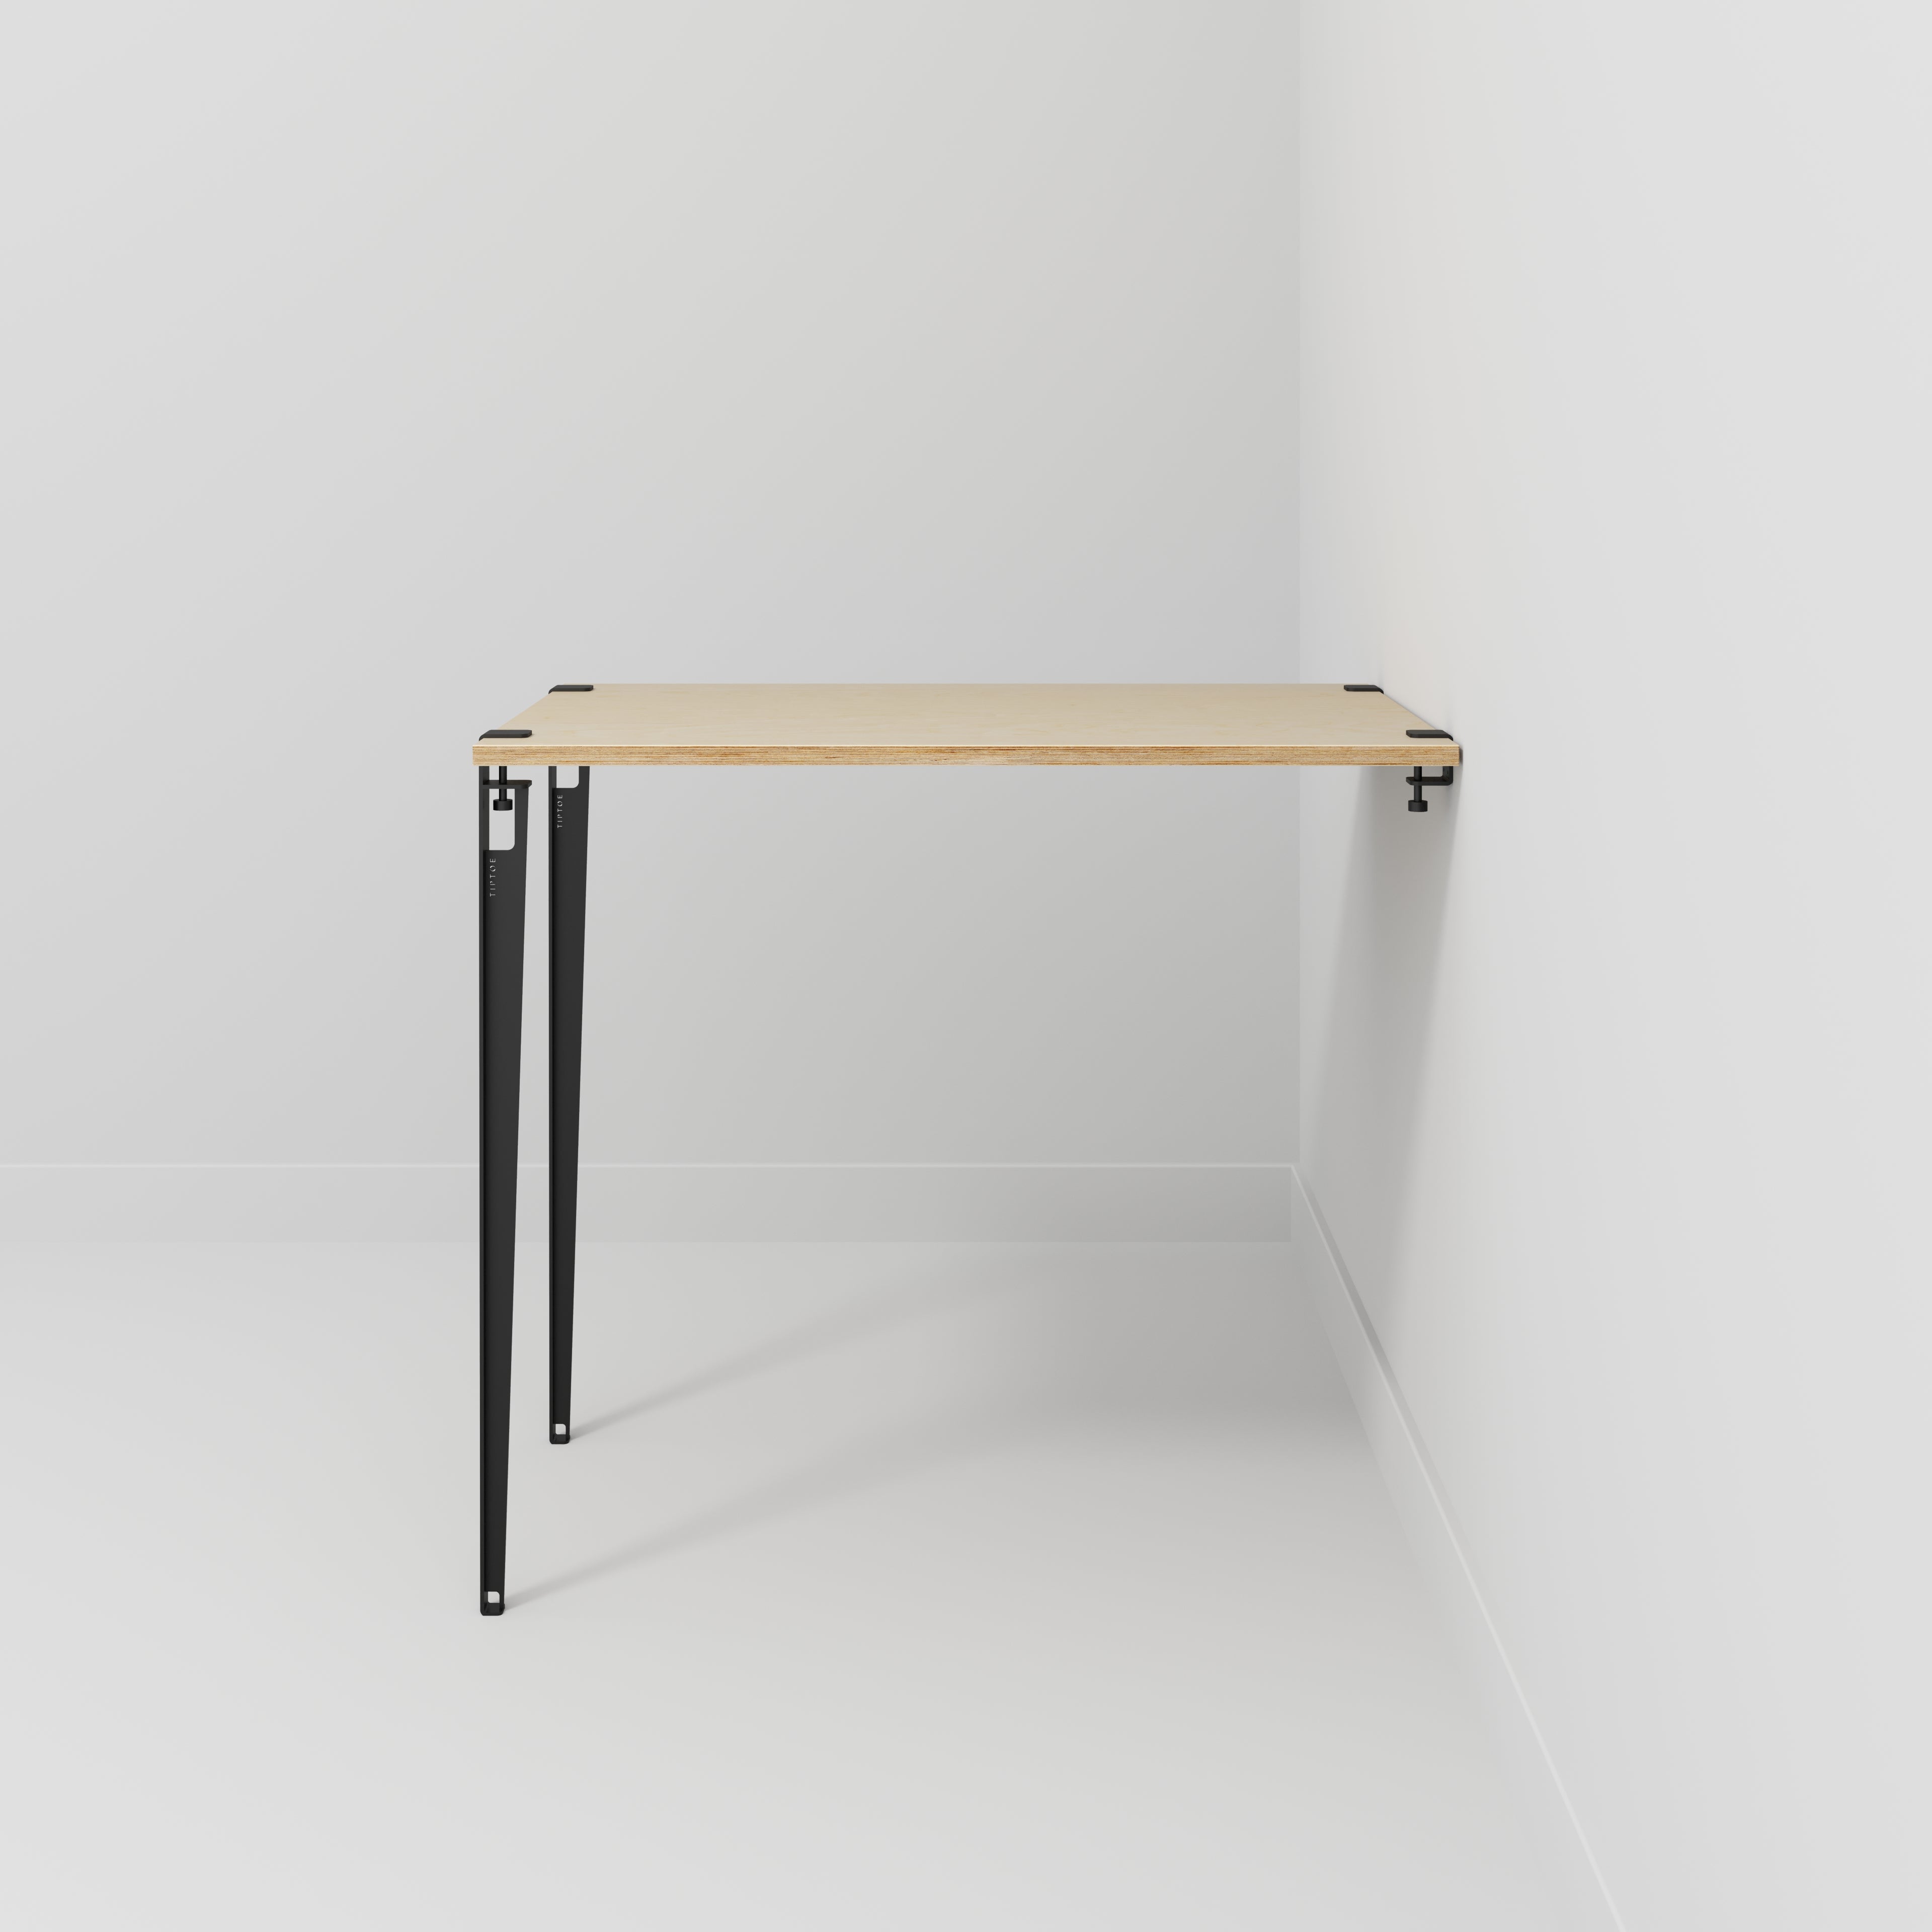 Wall Table with Black Tiptoe Legs and Brackets - Plywood Birch - 1200(w) x 800(d) x 1100(h)